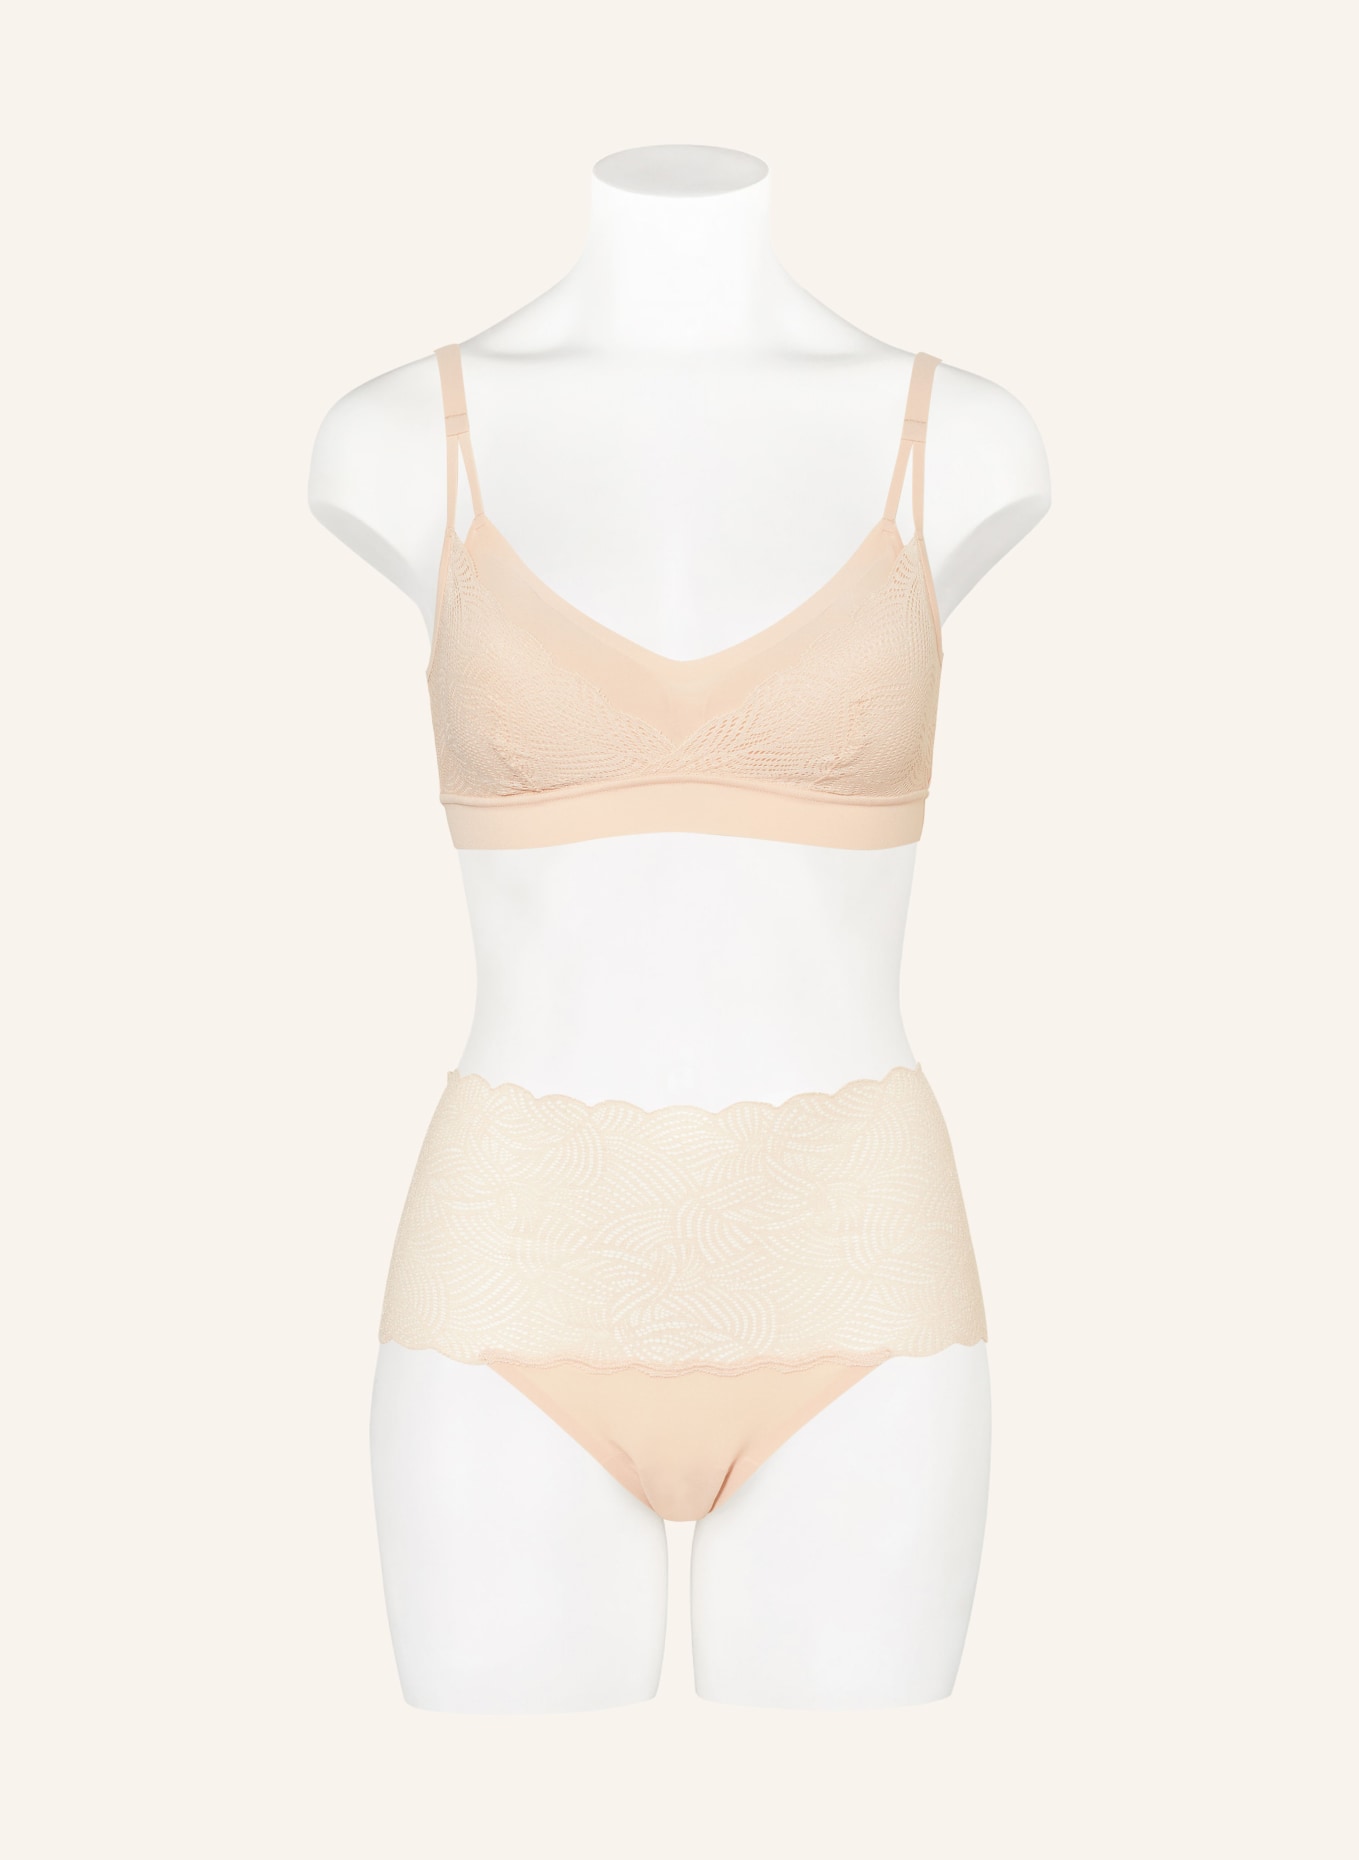 CHANTELLE Bustier SOFTSTRETCH, Farbe: NUDE (Bild 2)